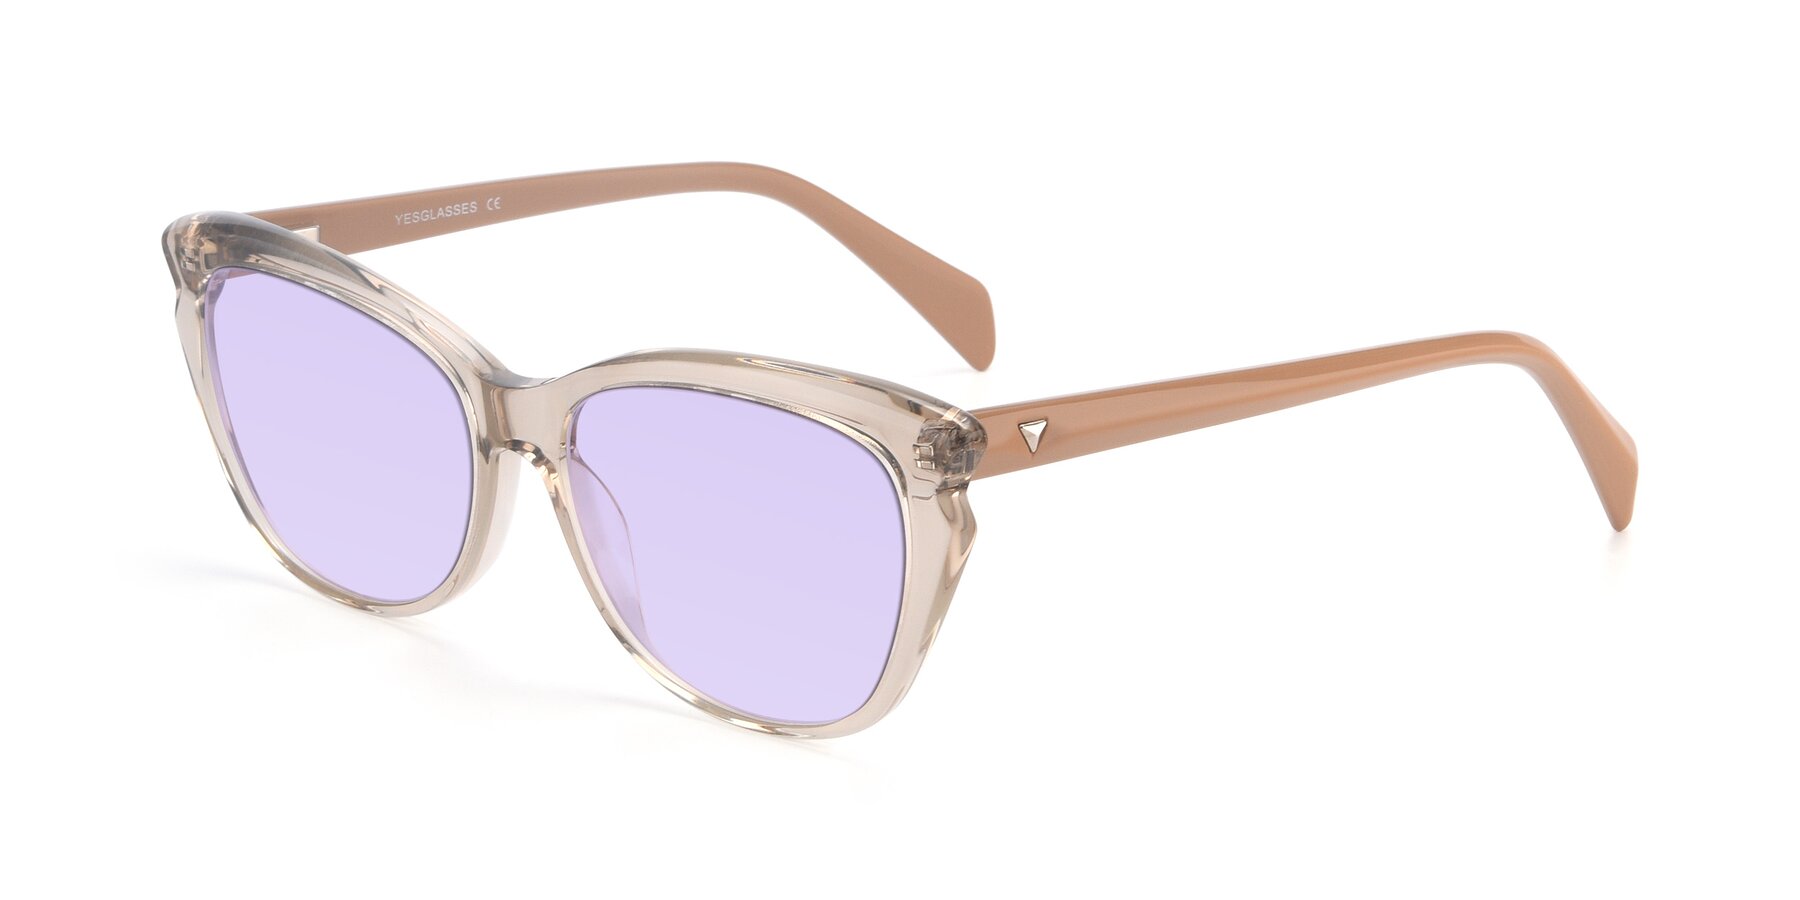 Angle of 17629 in Transparent Brown with Light Purple Tinted Lenses